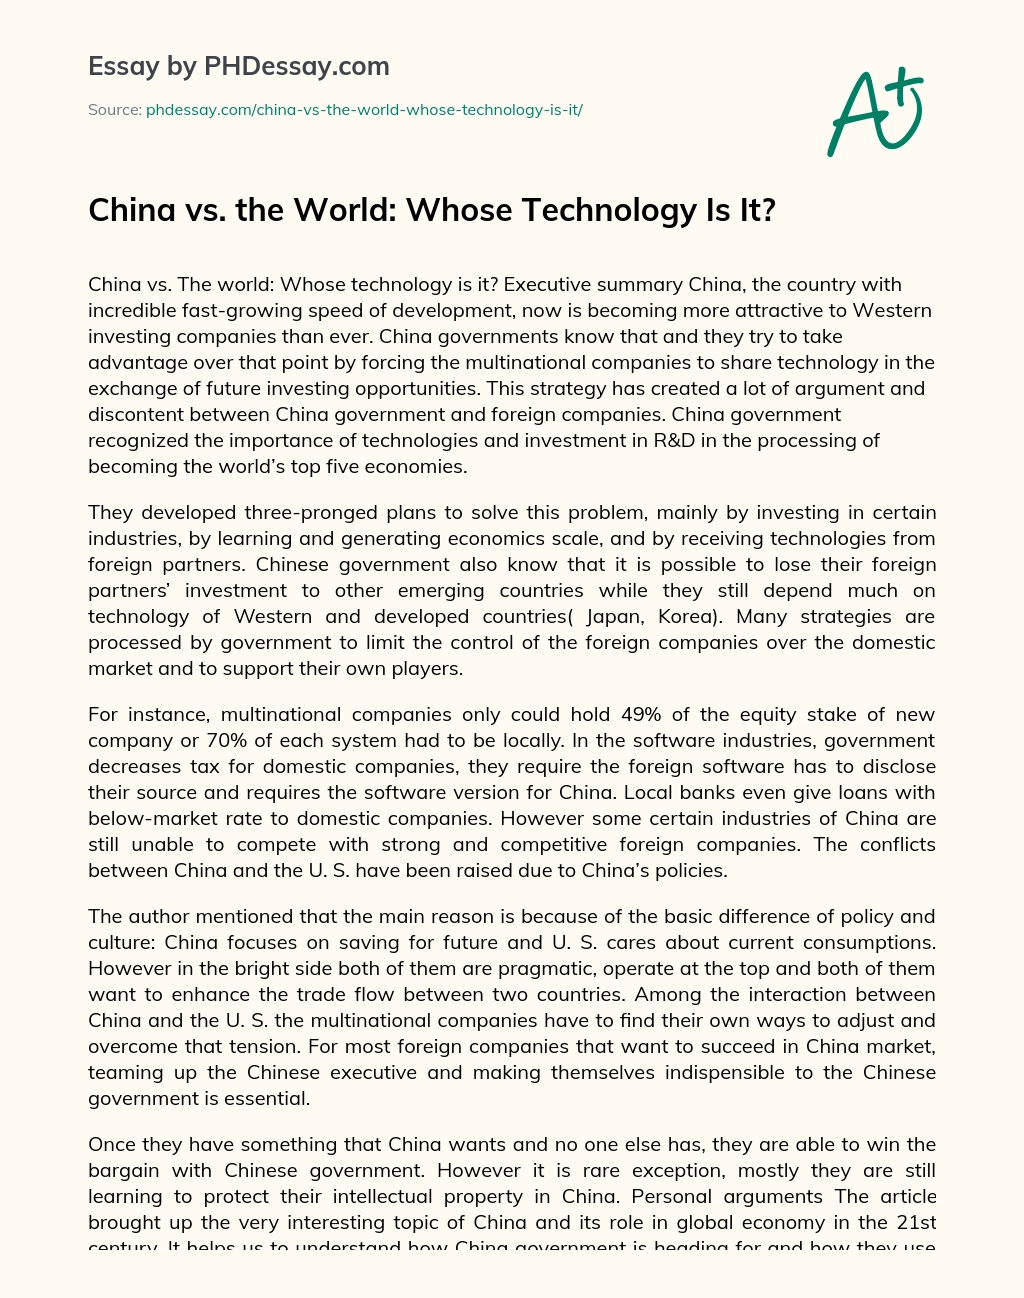 China vs. the World: Whose Technology Is It? essay